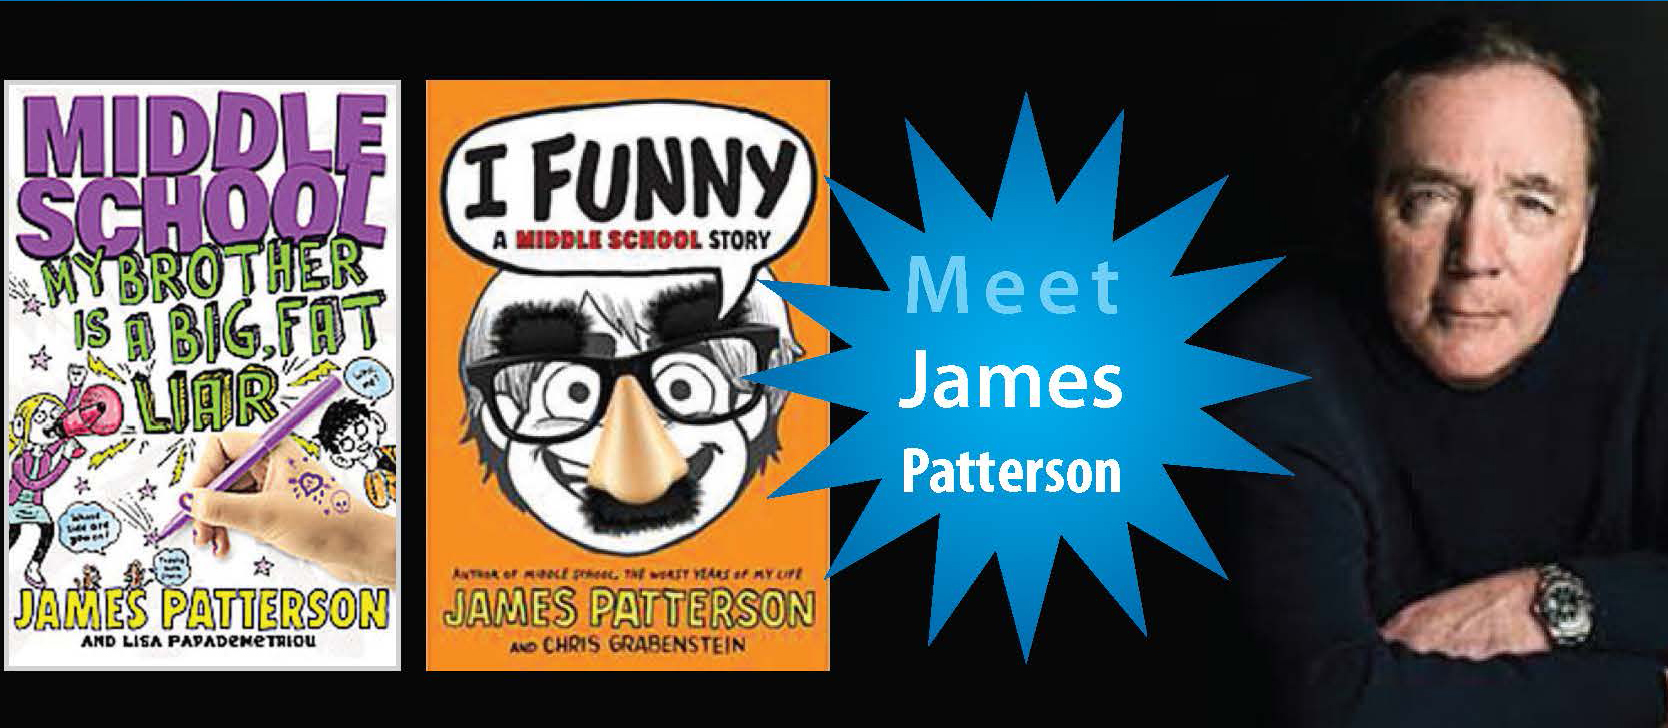 Meet James Patterson at the NAESP Foundation Jeans & Jerseys fundraiser